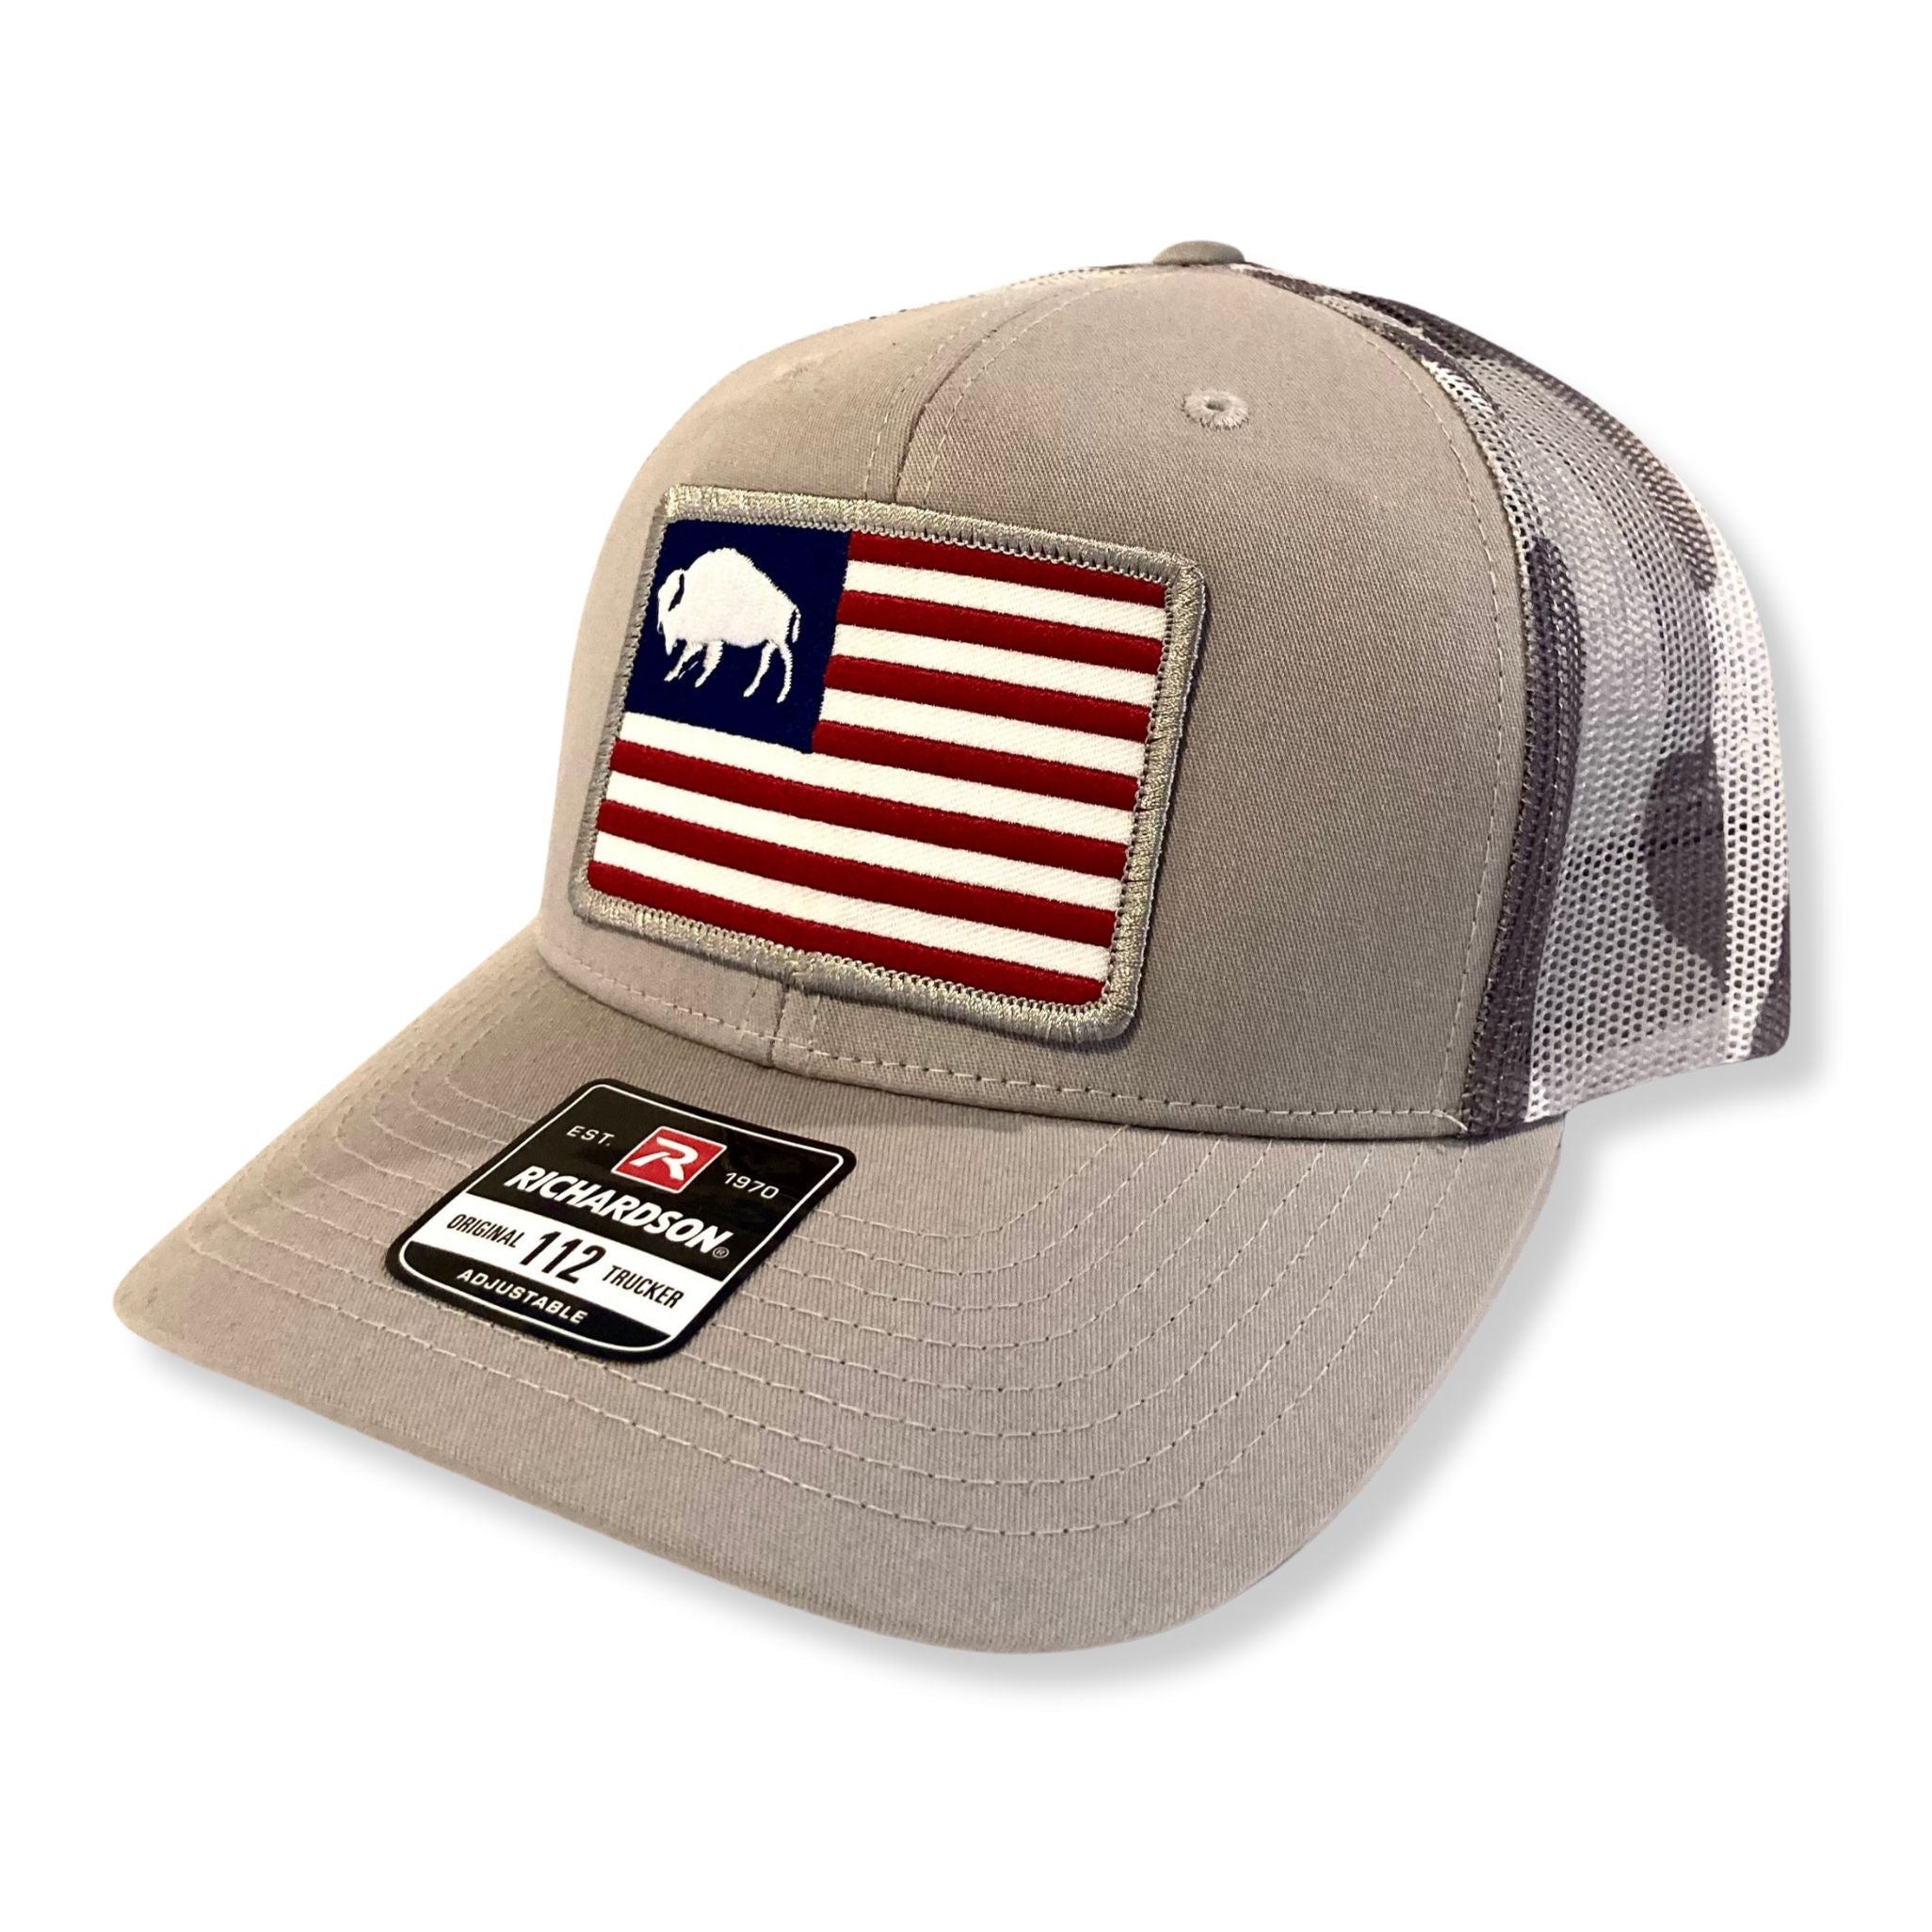 Grey and Camo Bison American Flag Patch Trucker Hat